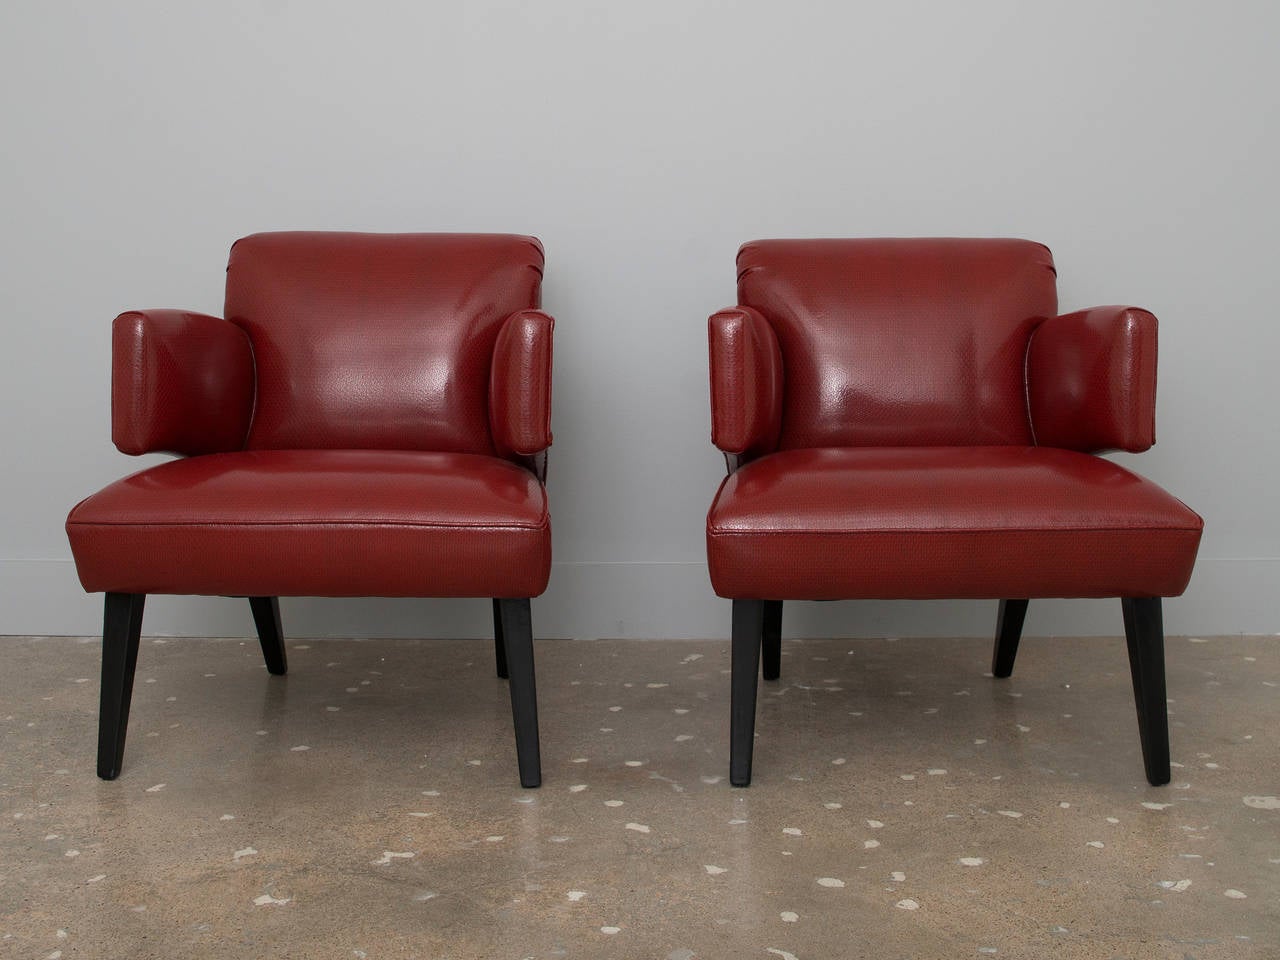 Highly unusual lounge chairs from the 1940s or 1950s.  Recently recovered in vinyl; very similar to the original fabric.  Graceful lines - we've never seen anything like them!